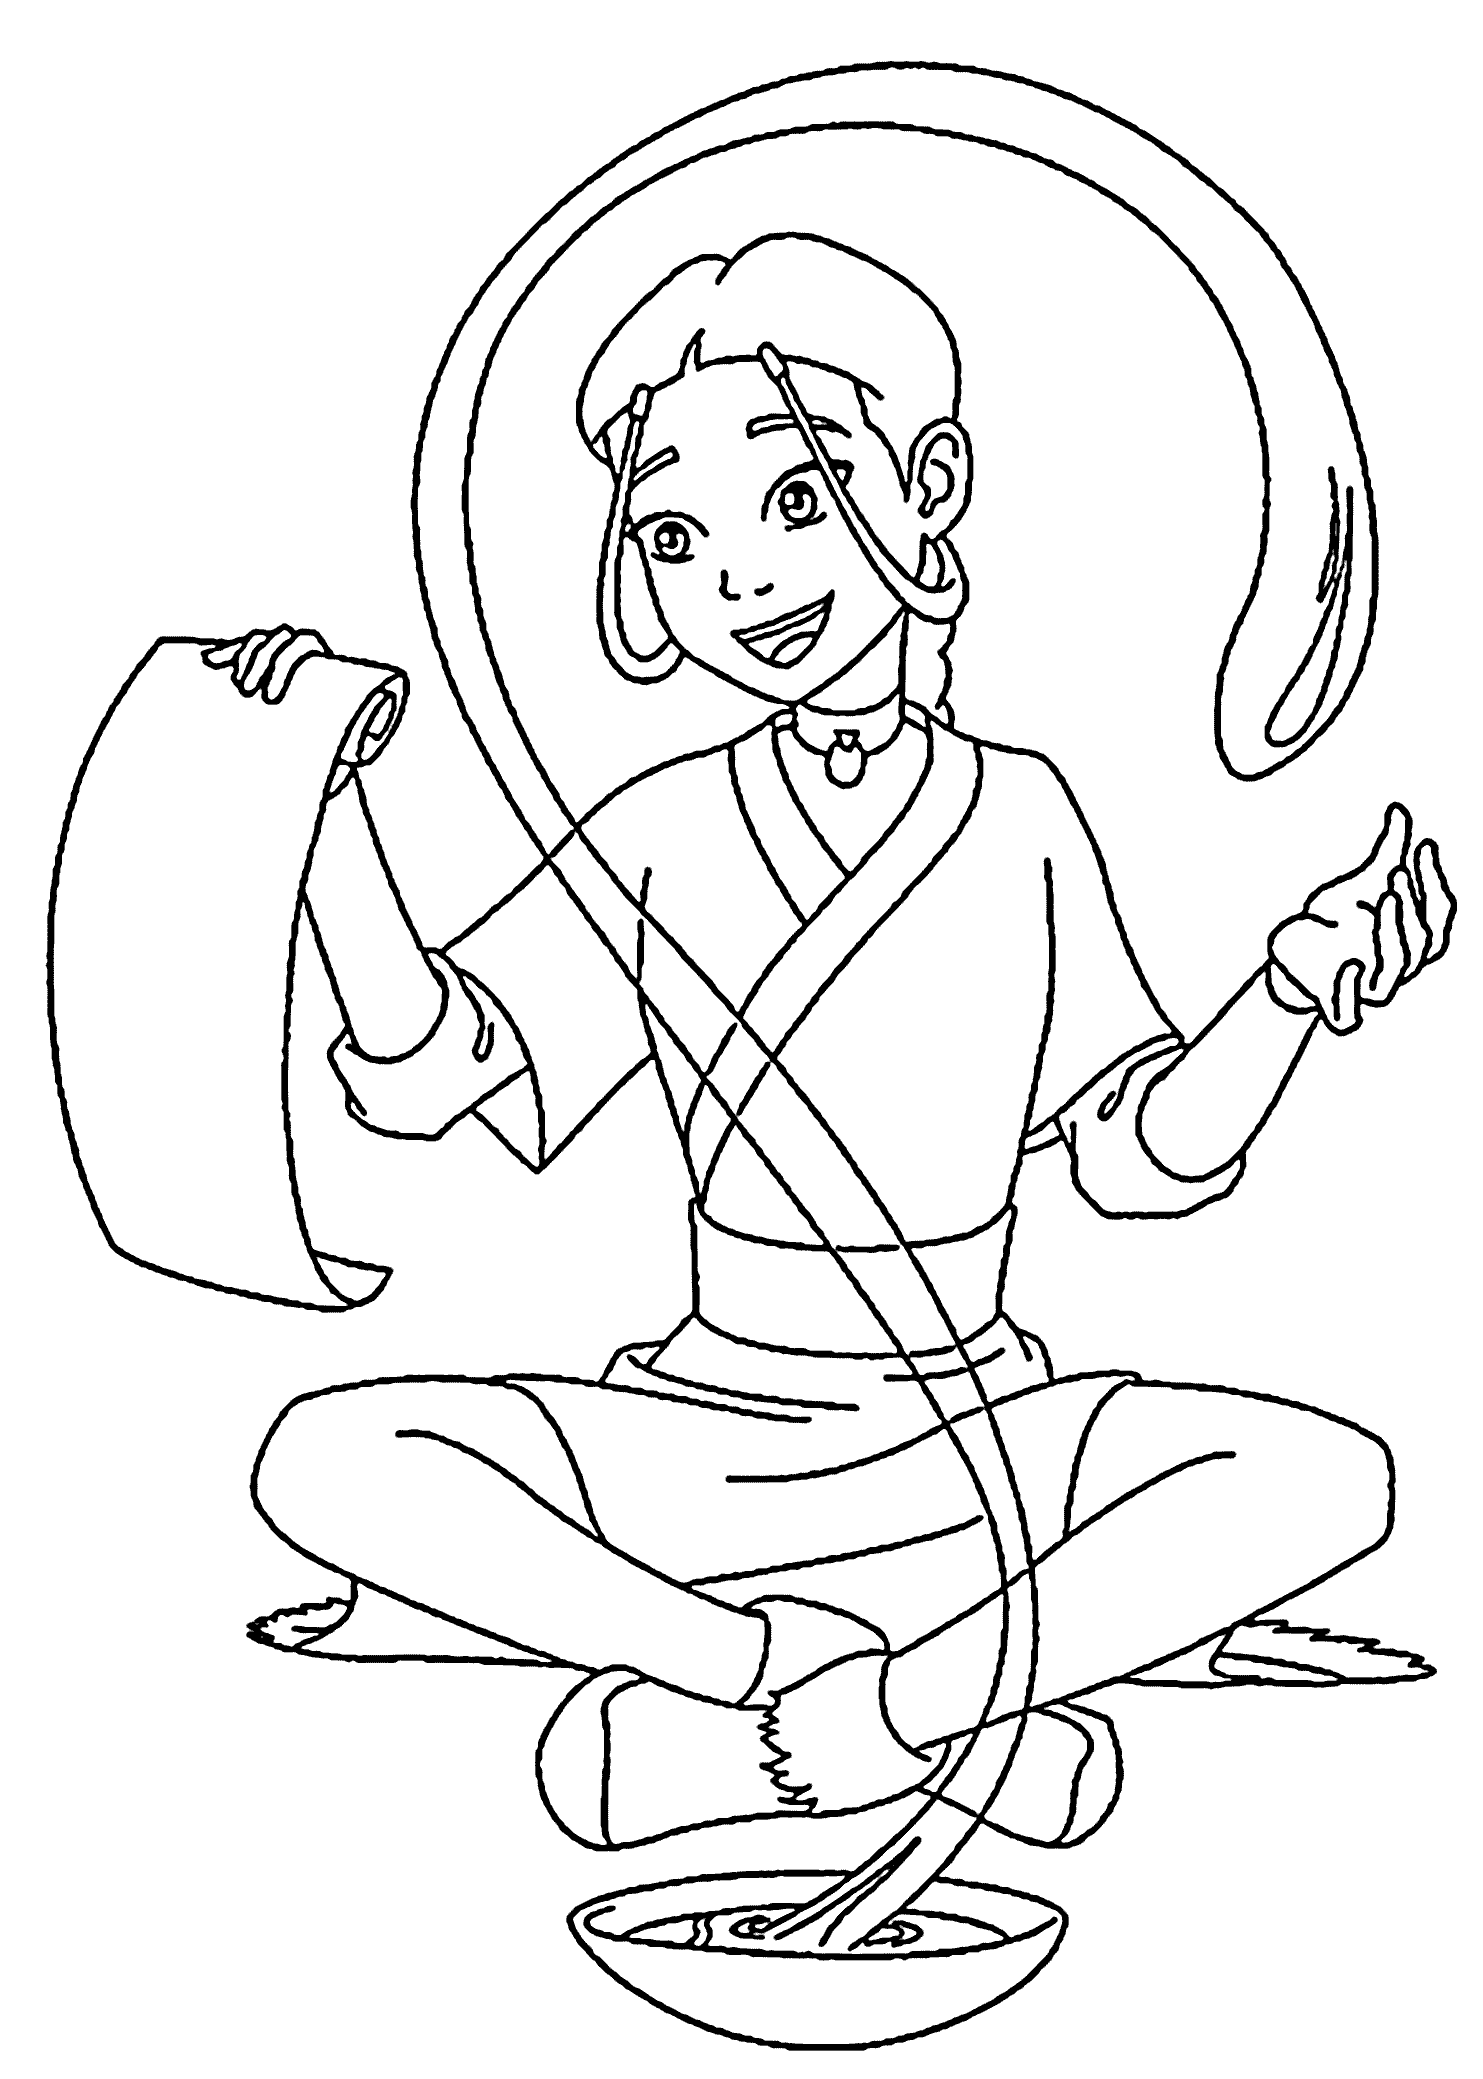 Airbender from The Legend of Korra coloring pages for kids, printable free  - The Legend of Korra | Cartoon coloring pages, Coloring books, Coloring  pages